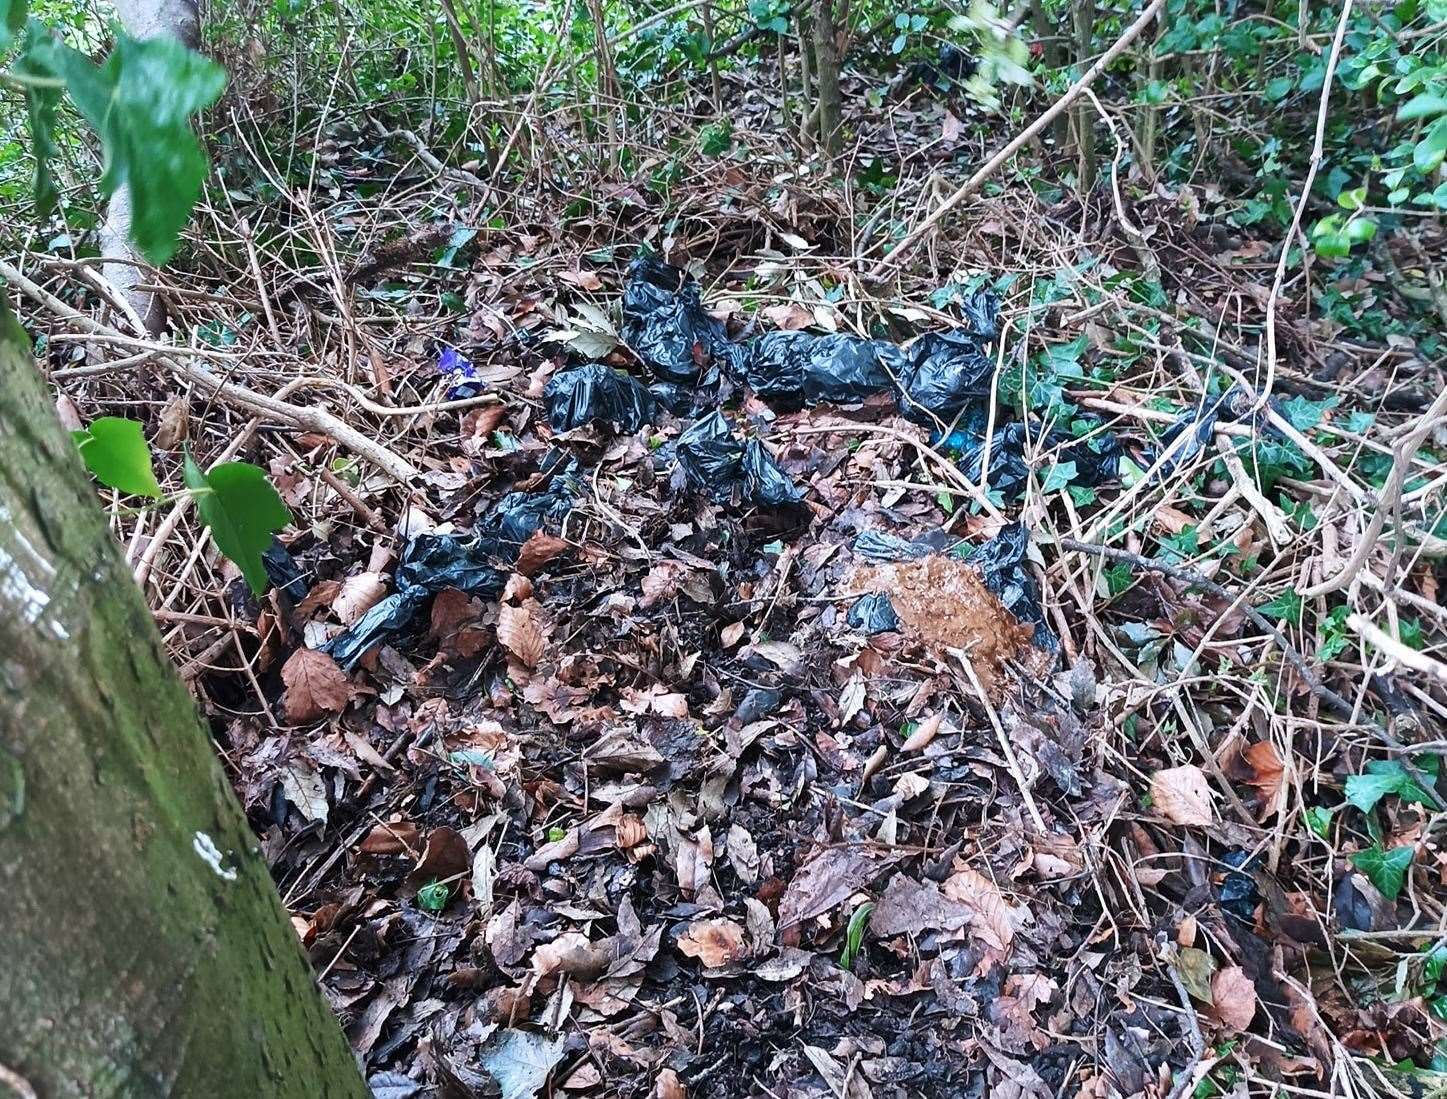 The waste was found along near Coolinge Lane